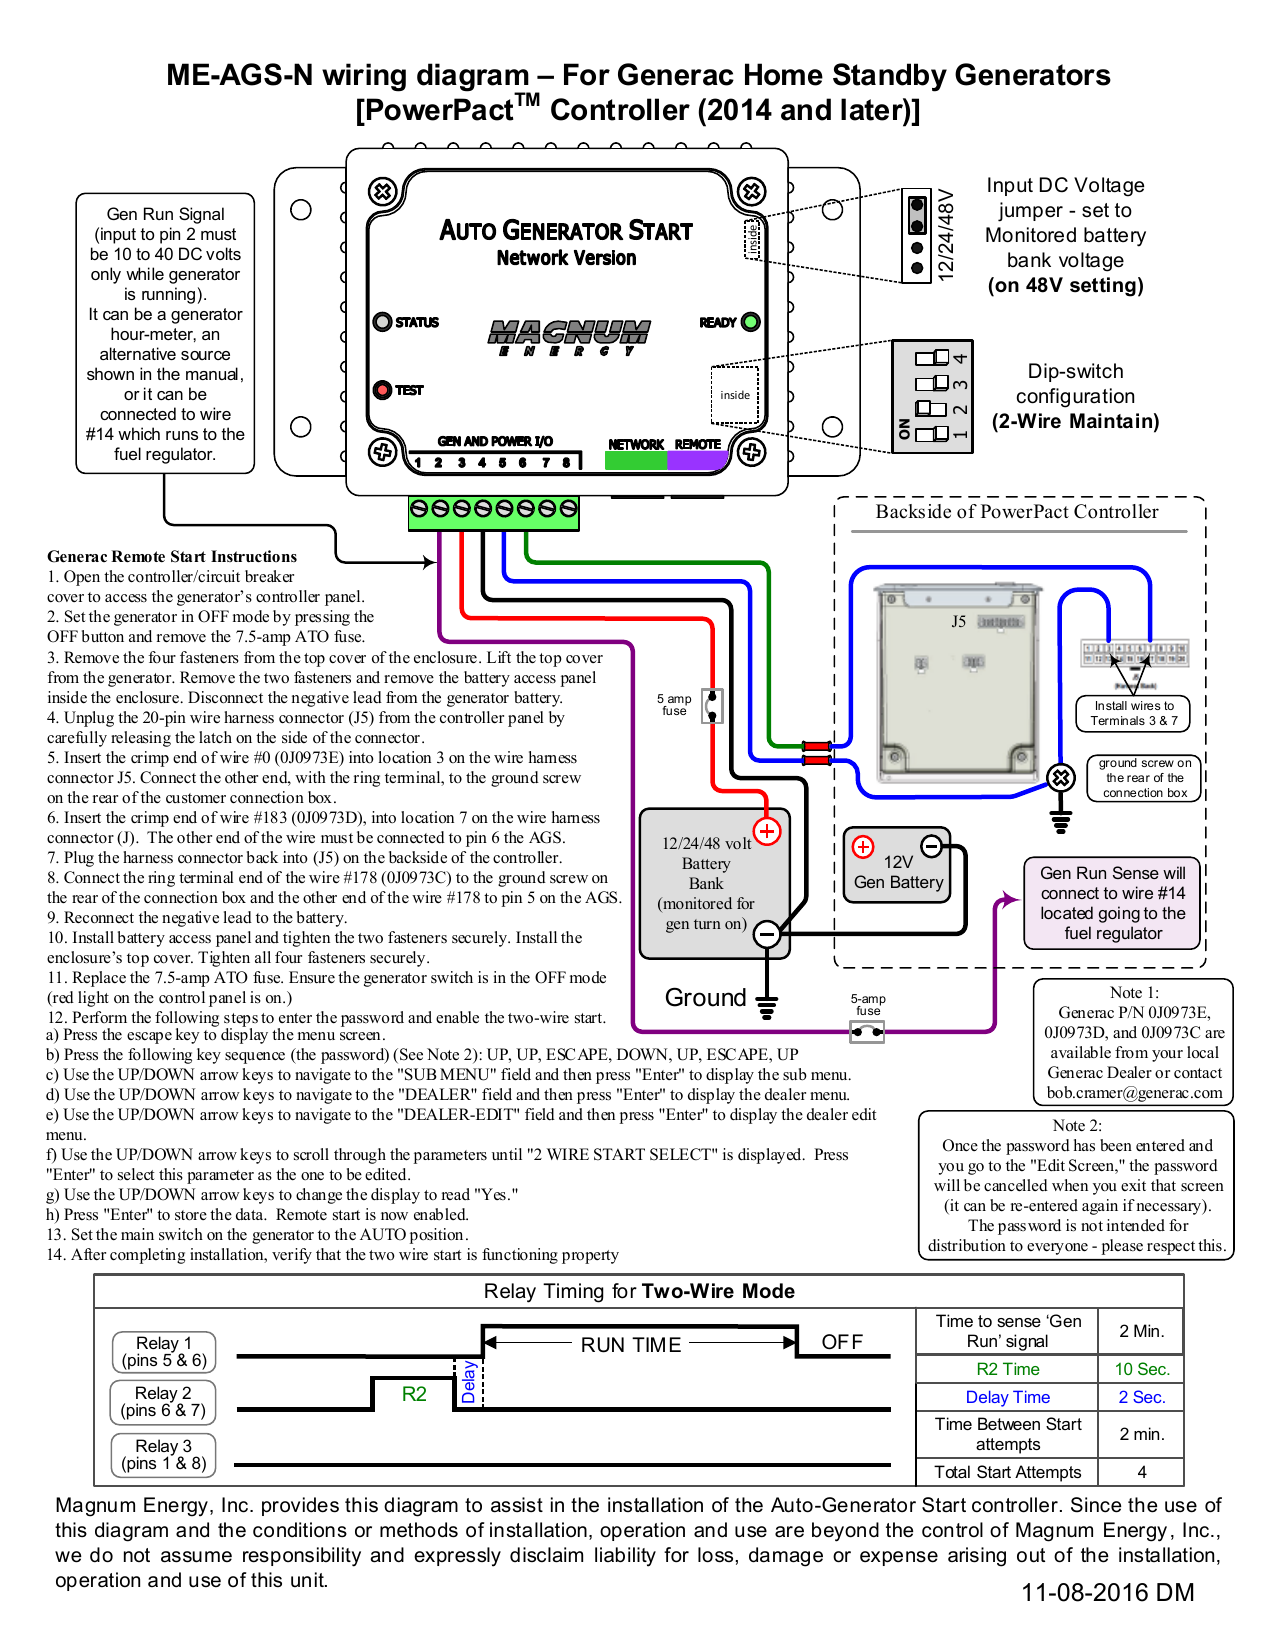 Wiring Diagram For Generac Standby Generator - Wiring Diagram and Schematic